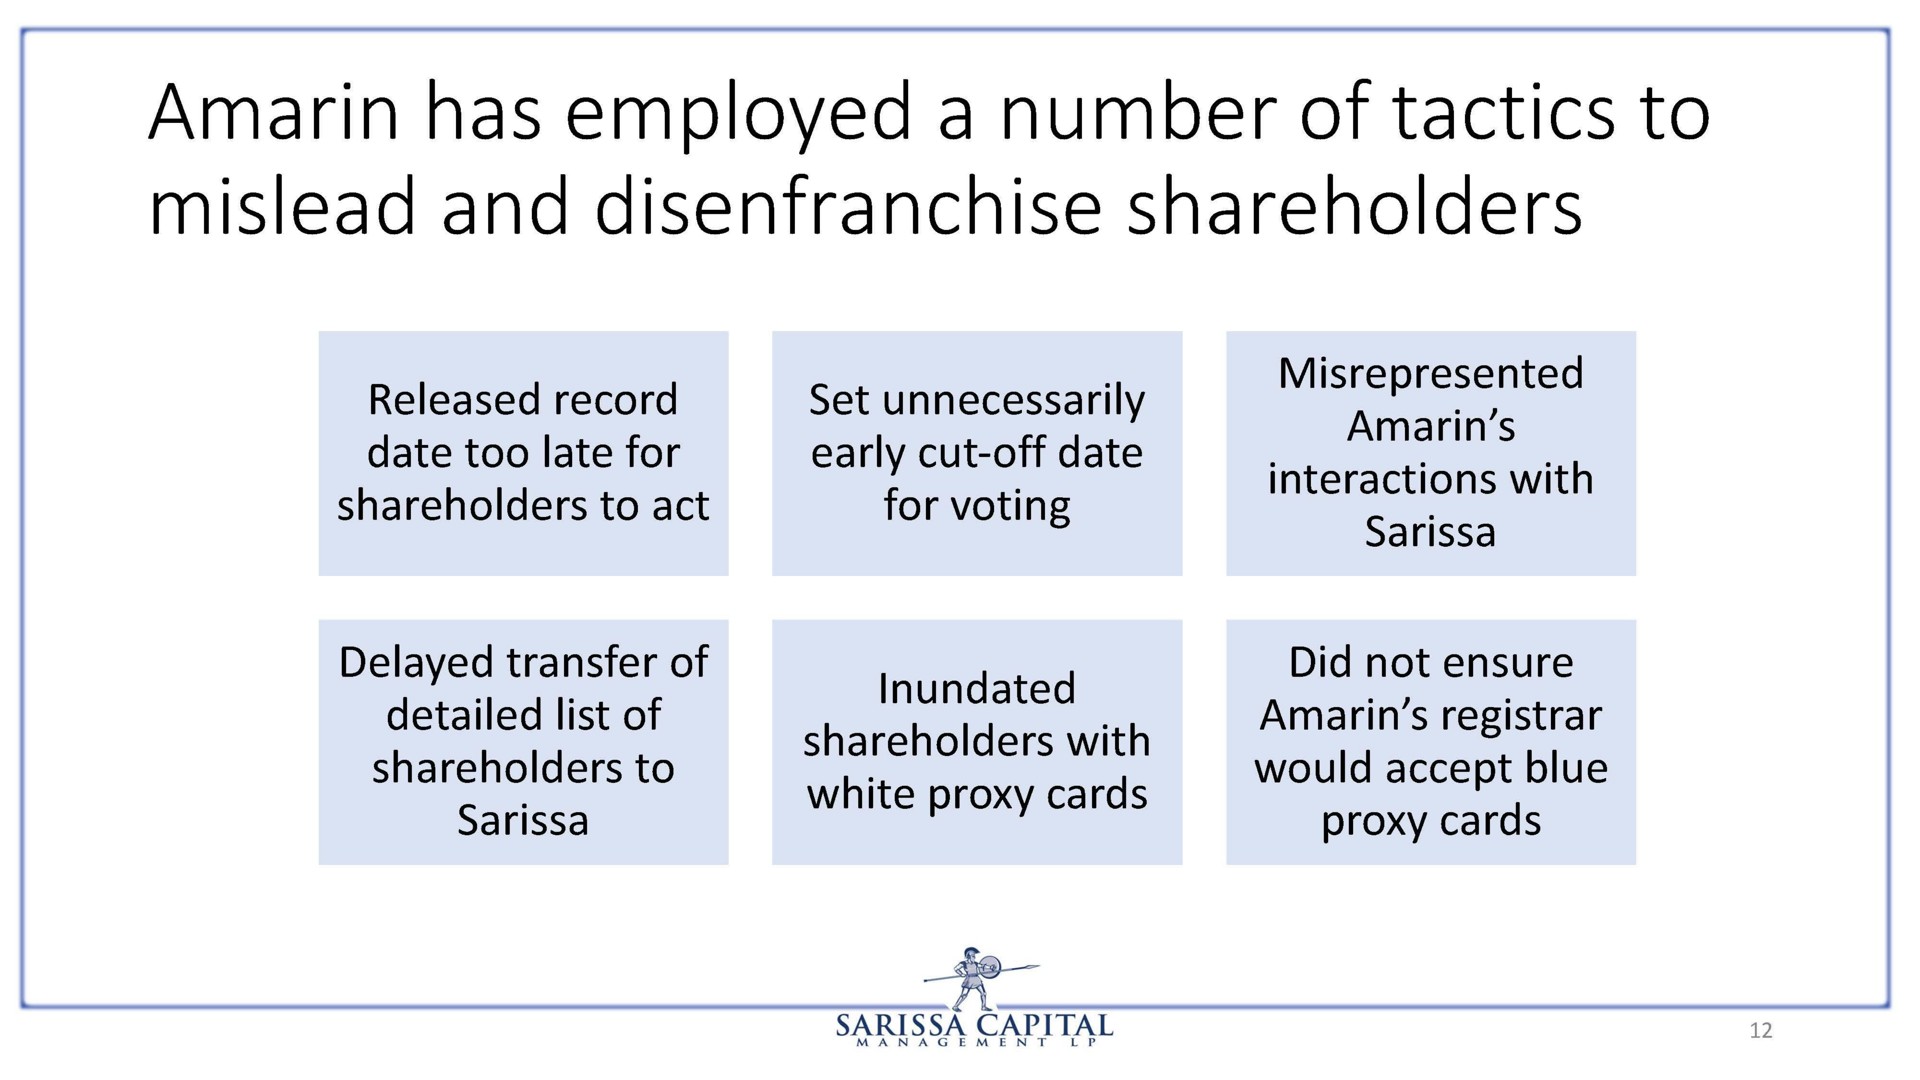 amarin has employed a number of tactics to mislead and disenfranchise shareholders | Sarissa Capital